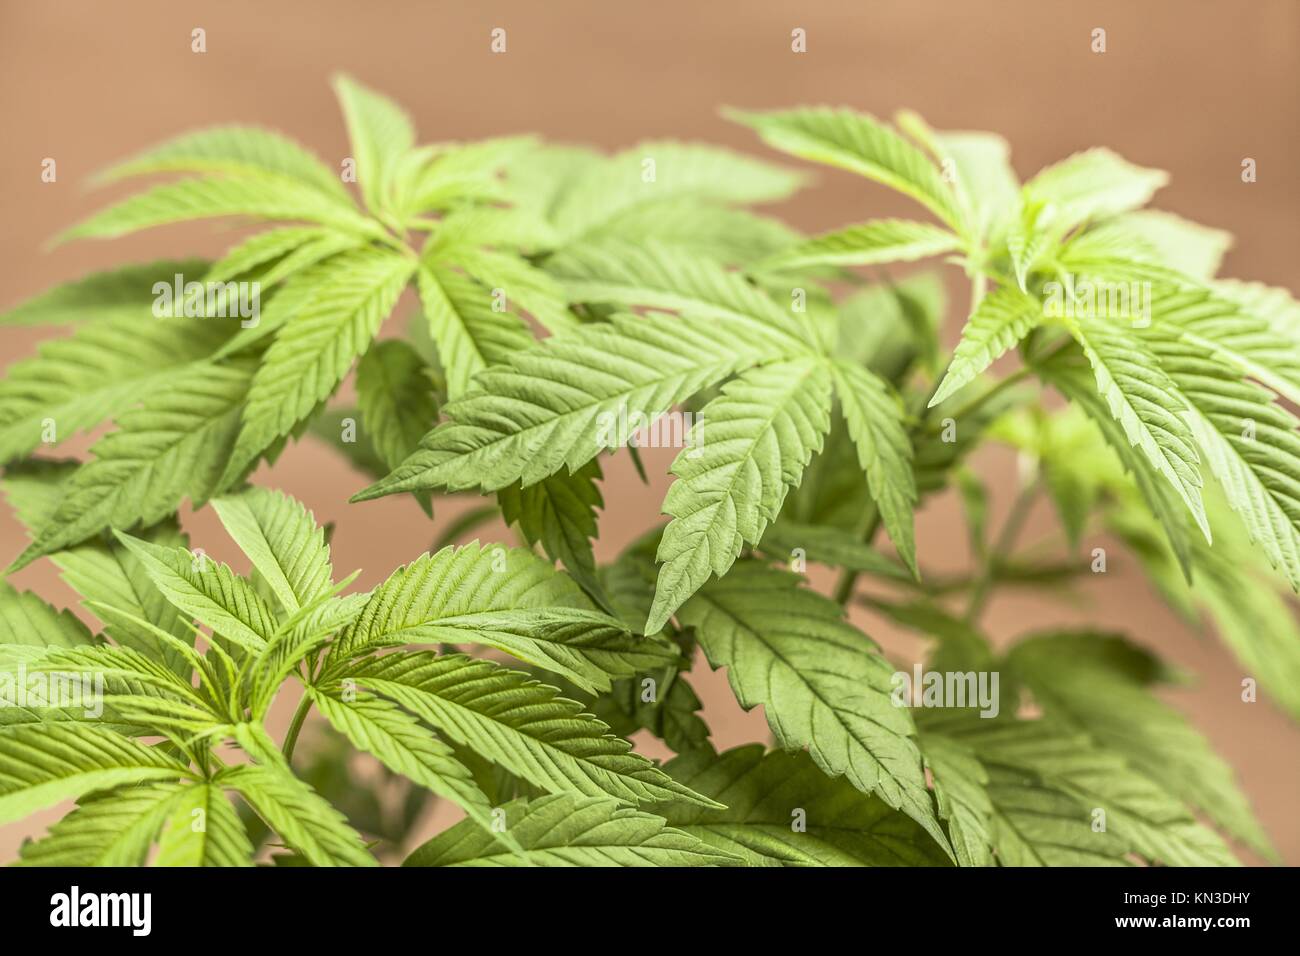 Detail of Cannabis female plant, Indica dominant hybrid in vegetative stage. Stock Photo